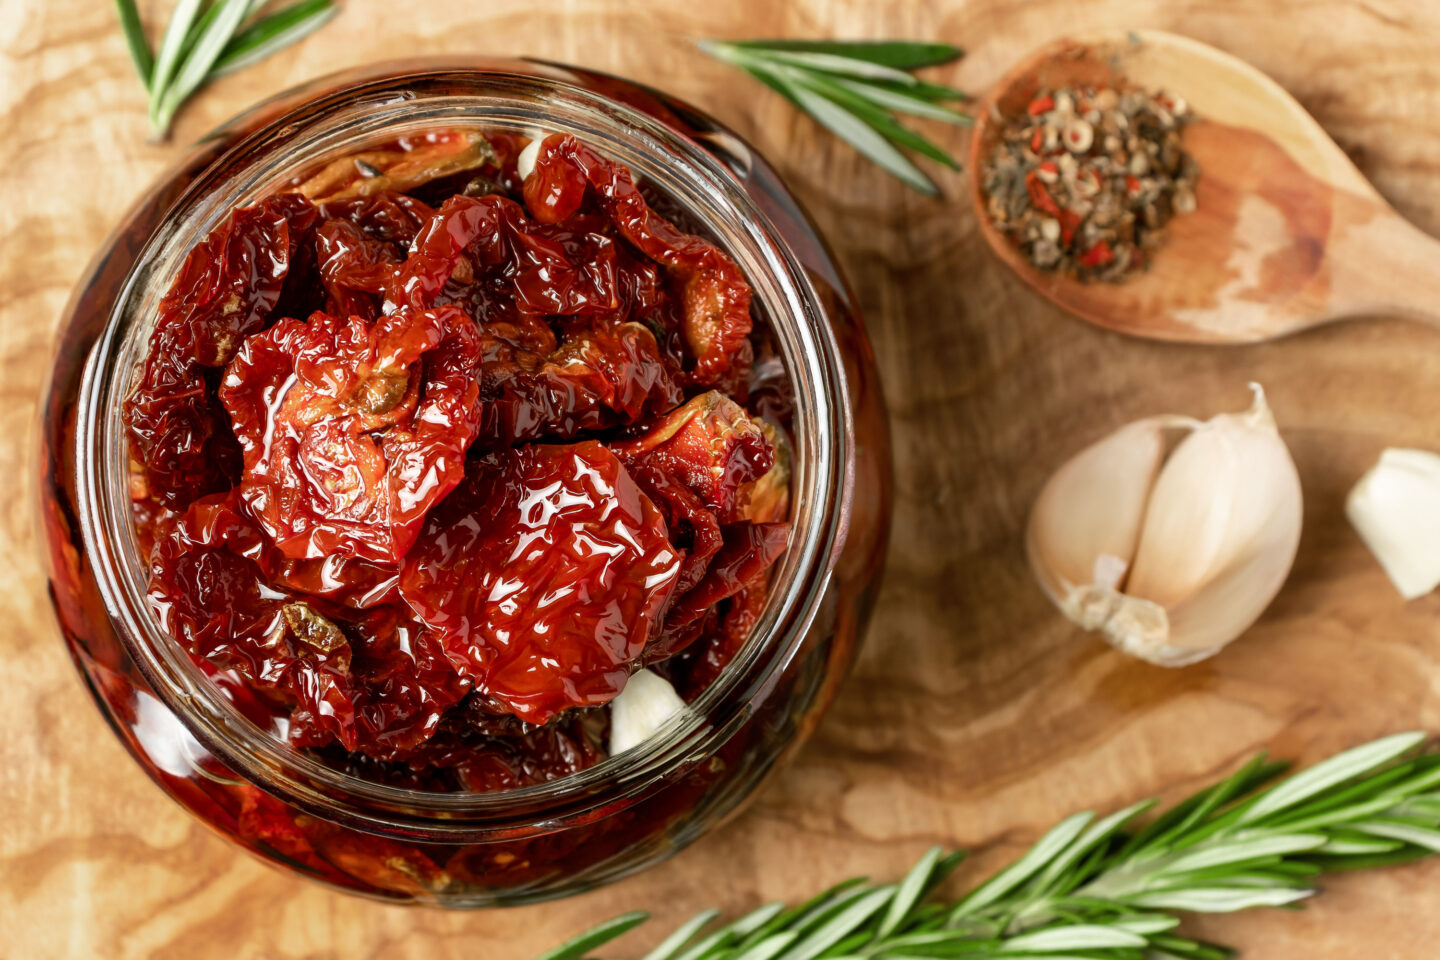 sun dried tomatoes with herbs and spices